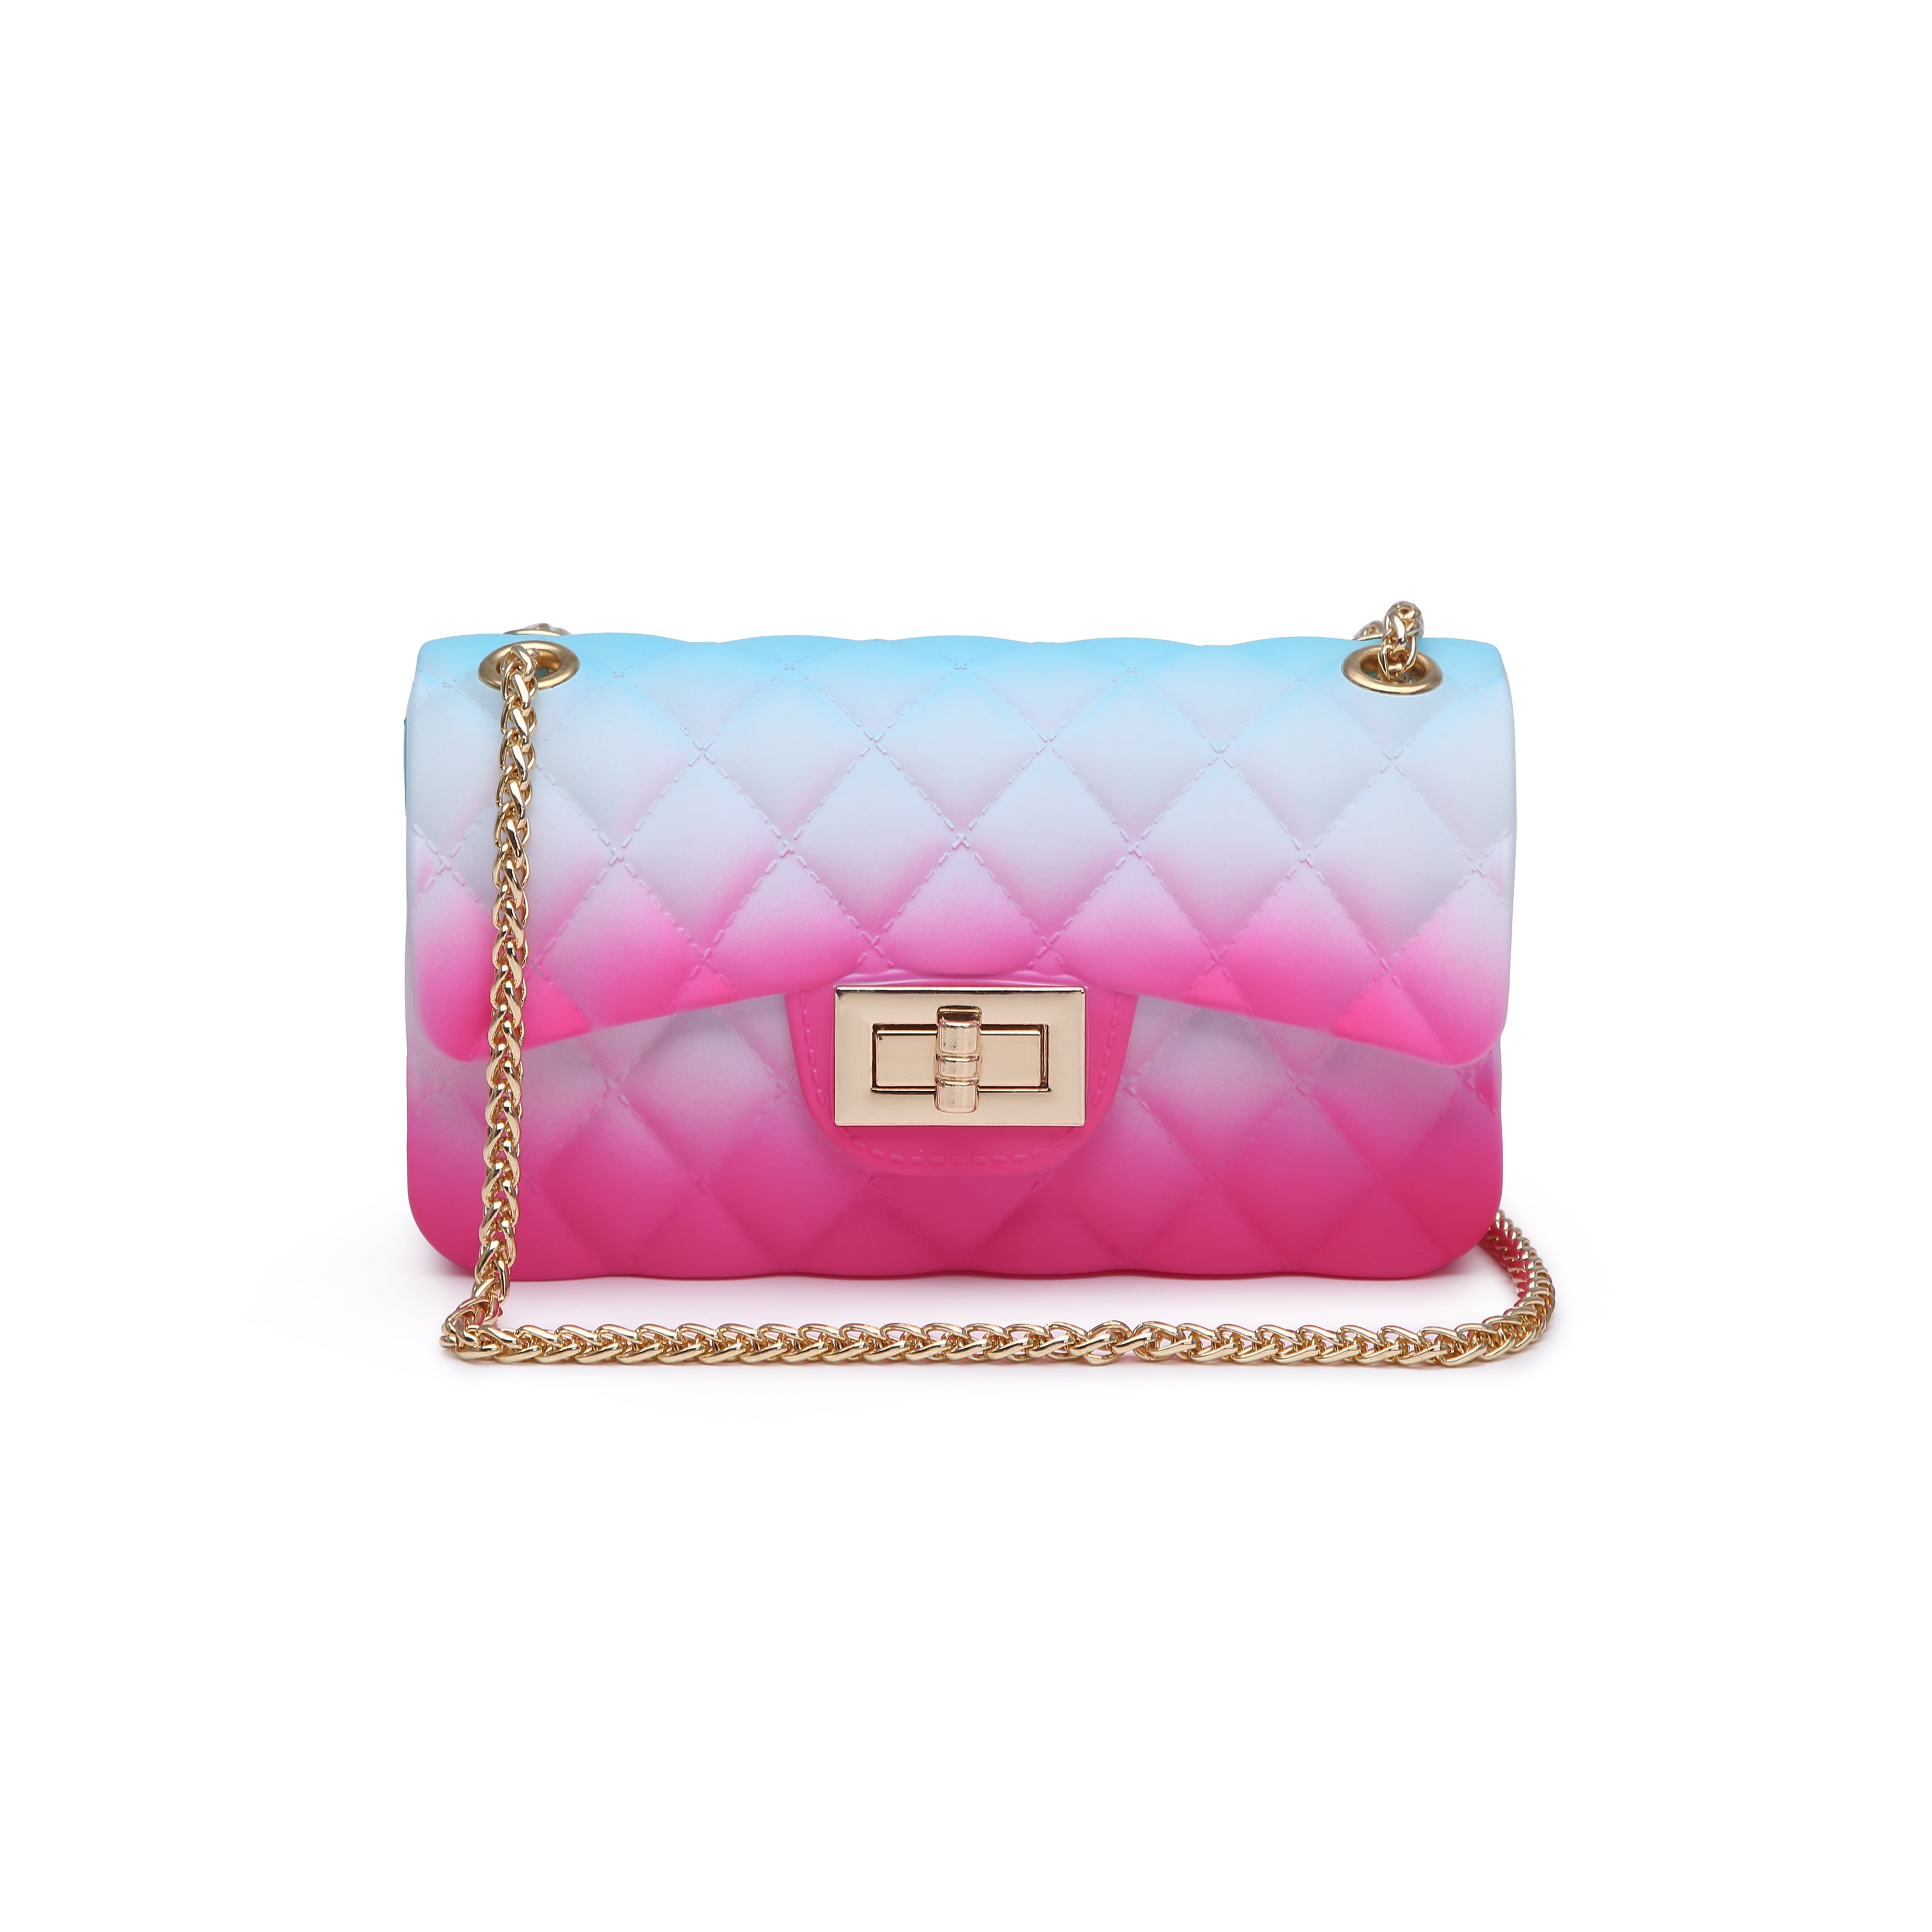 Poppy Fashion Rainbow Color Quilted Jelly Bag PVC Crossbody Shoulder ...